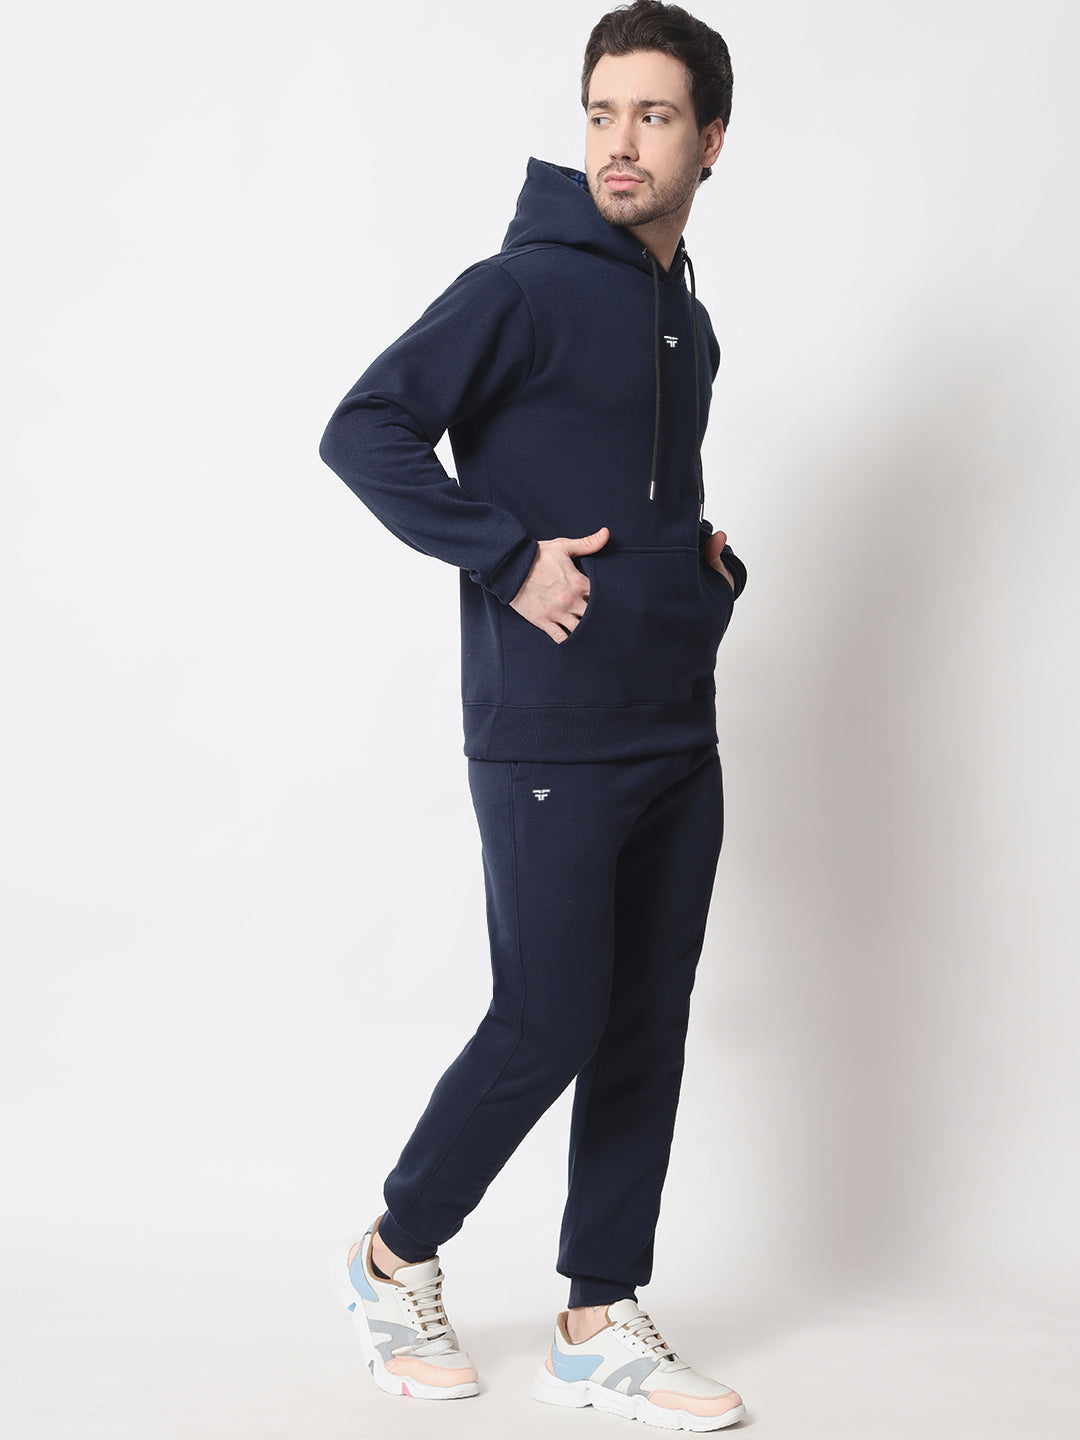 Navy Blue Thermal Co-ord Set (Hoodie and Jogger Combo)